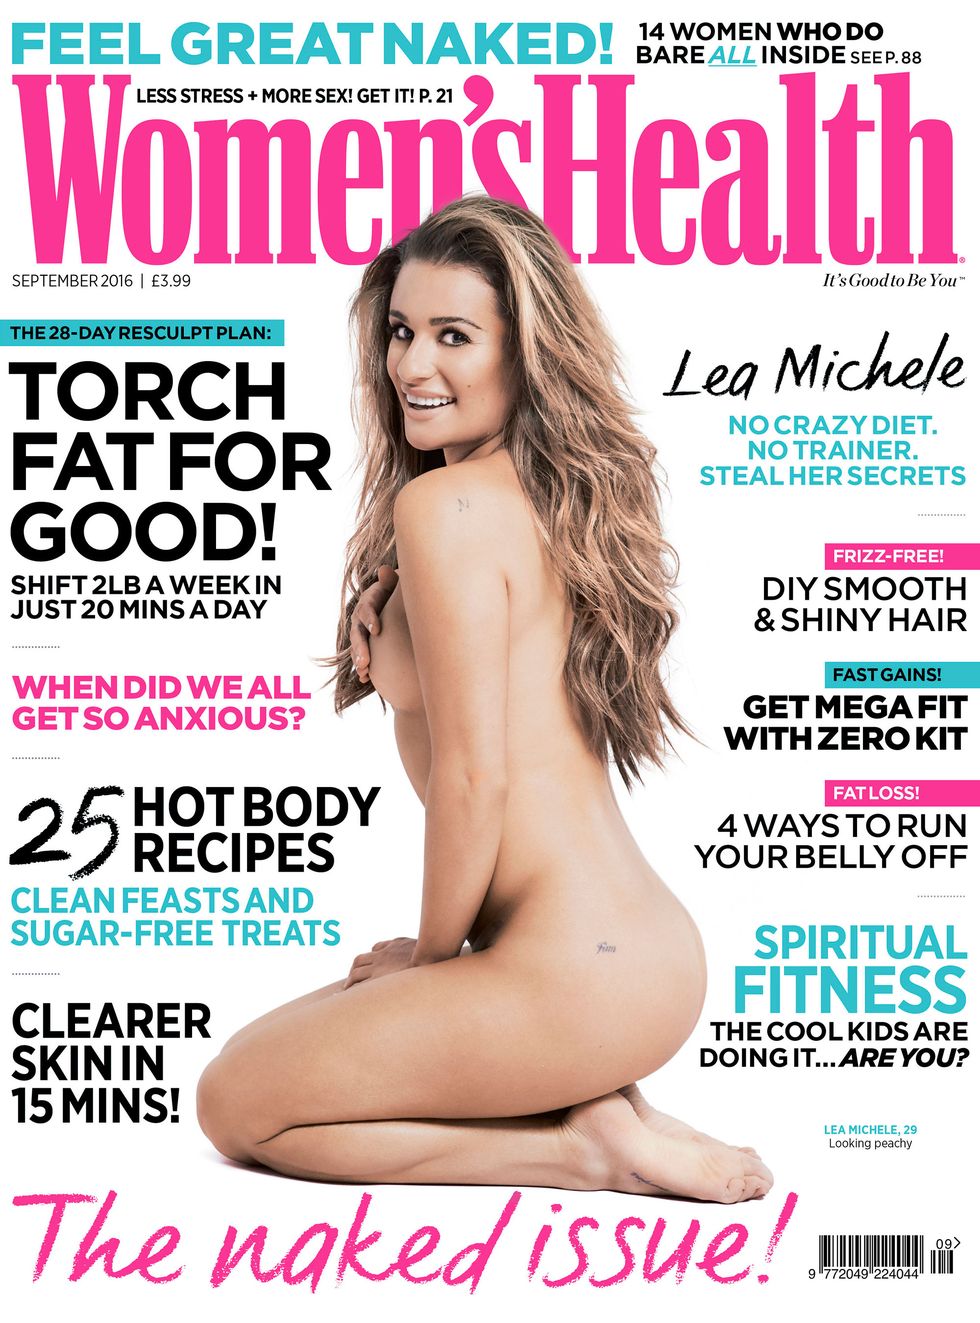 Lea Michele for Women's Health Naked issue